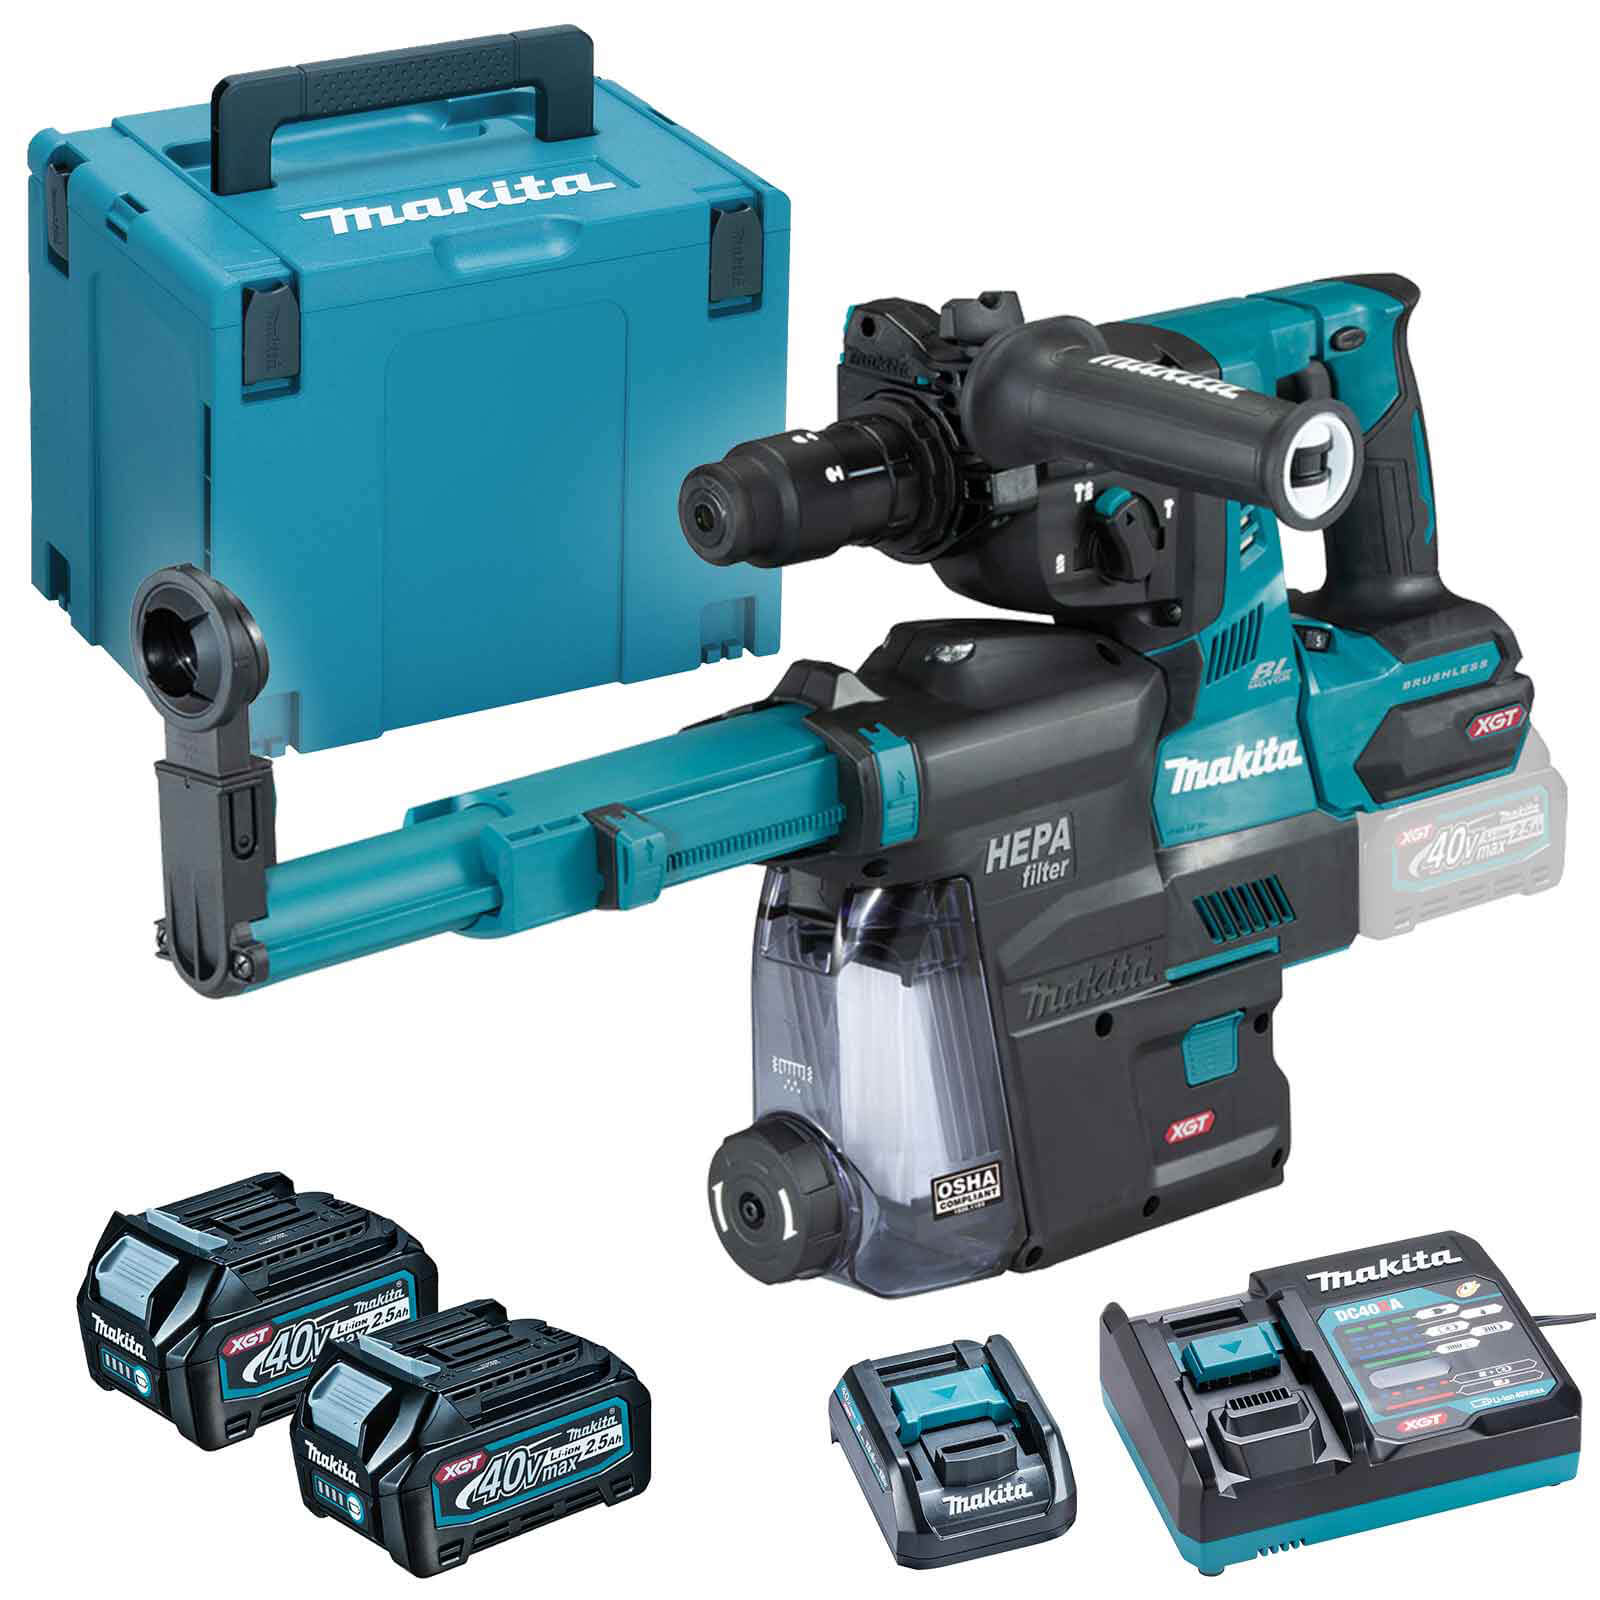 Image of Makita HR004G 40v Max XGT Cordless Brushless SDS Plus Rotary Hammer Drill 2 x 2.5ah Li-ion Charger Case